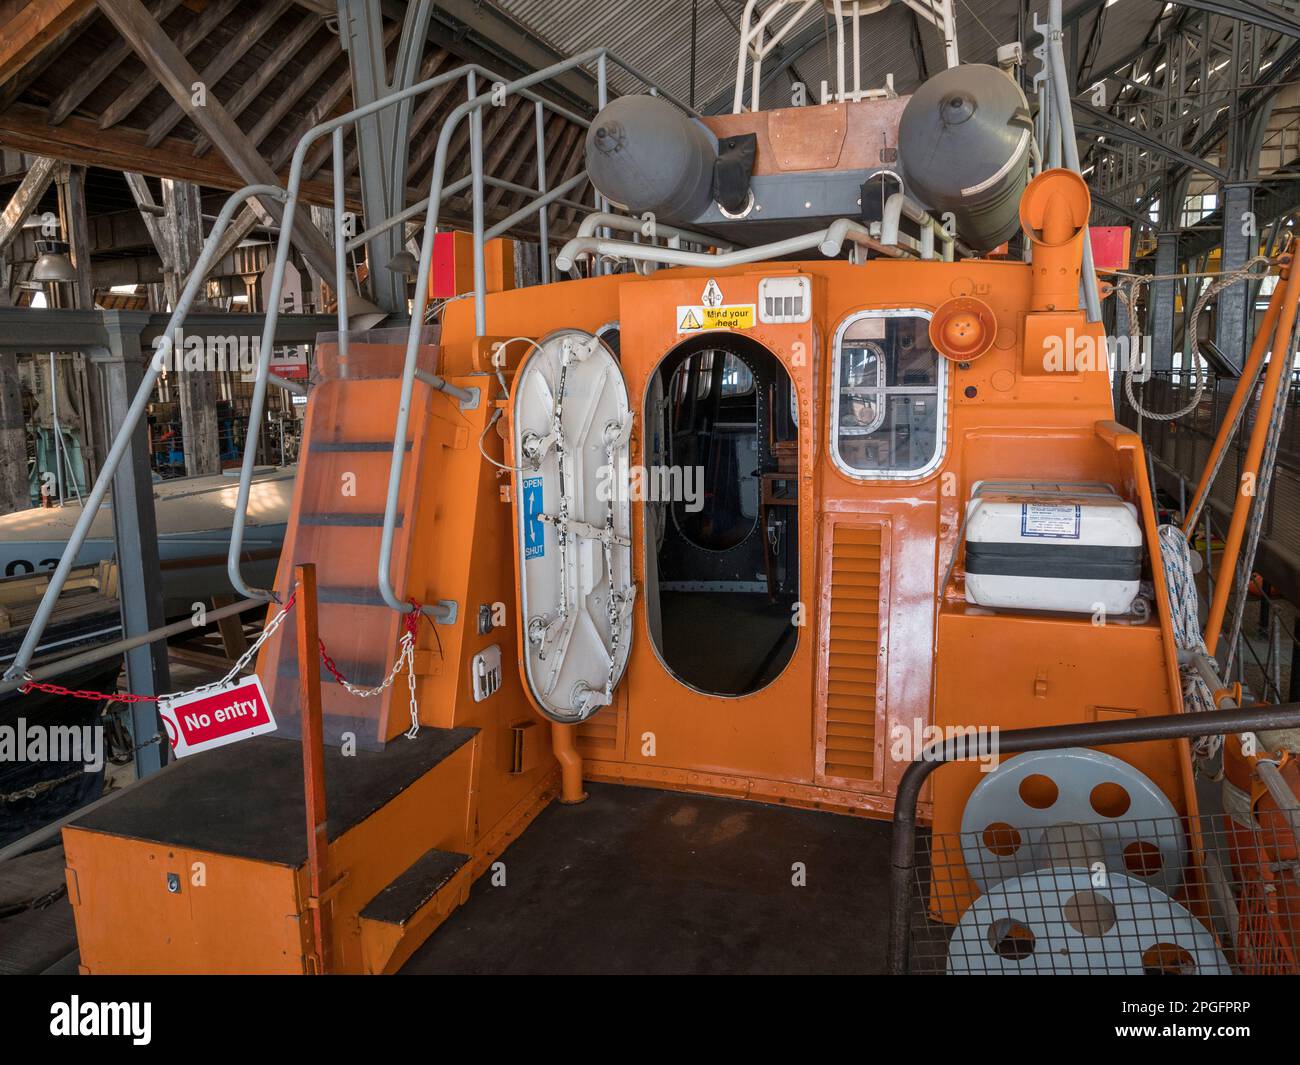 Looking into the bridge of the 'Edward Bridges' Arun class lifeboat in the RNLI Historic Lifeboat Collection, Historic Dockyard Chatham, Kent, UK. Stock Photo